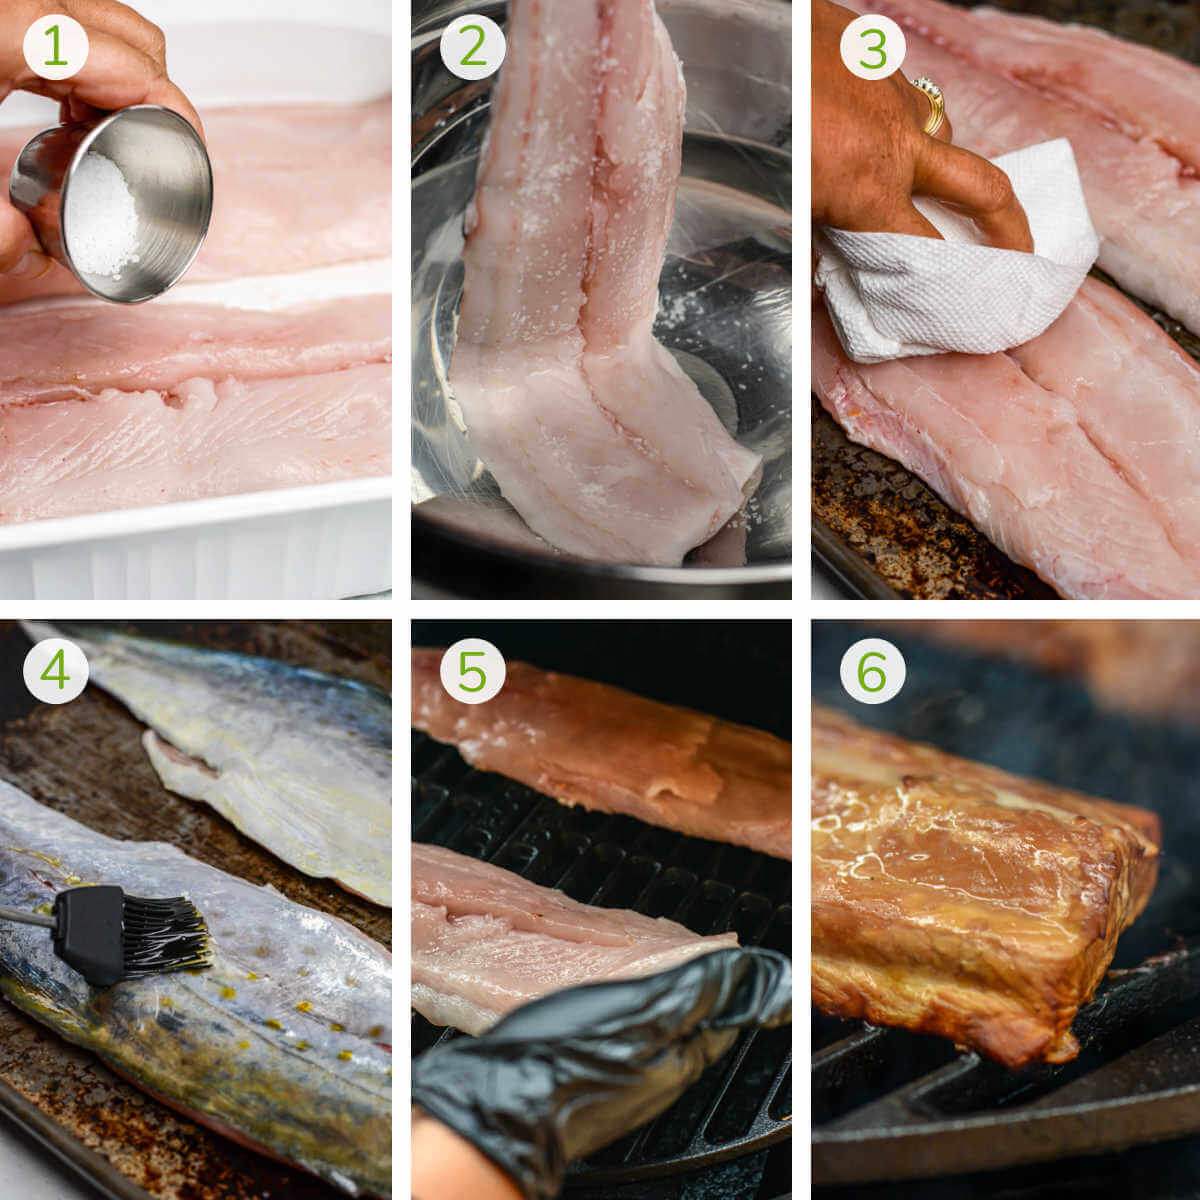 process photos showing adding a dry brine salt, rinsing in water, patting dry with paper towel, oiling the skin and smoking the mackerel.